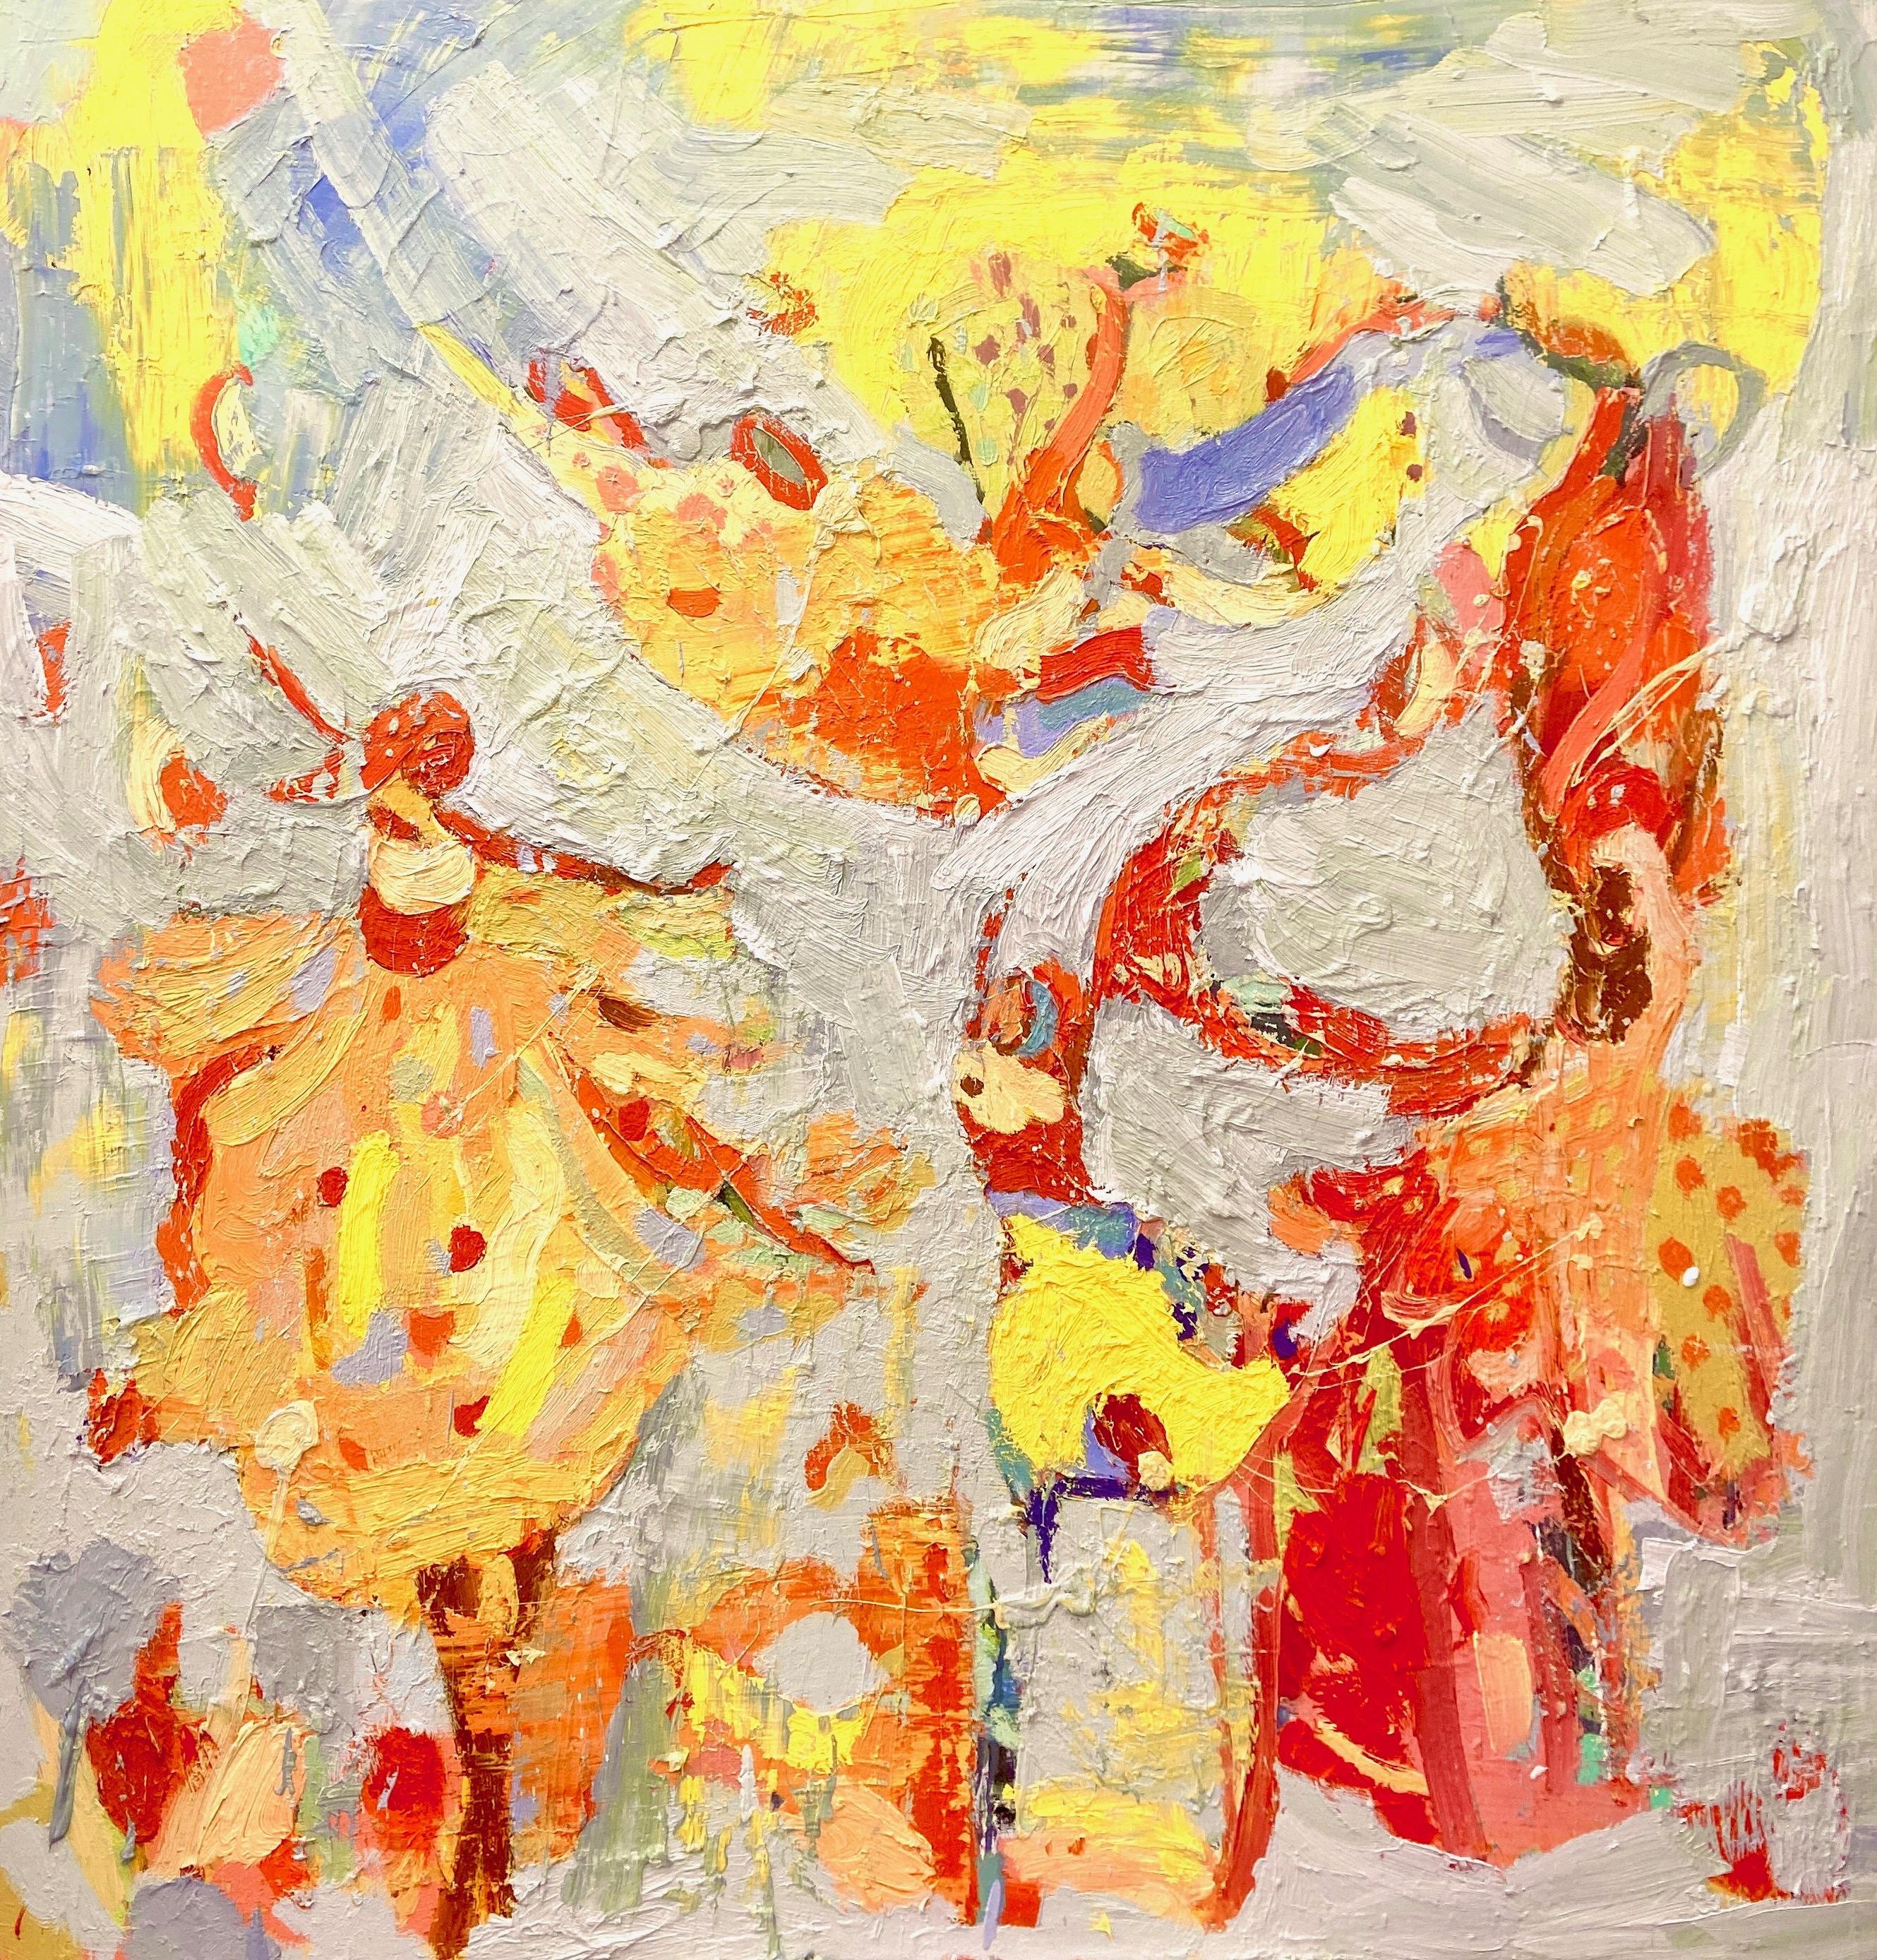 Paul wadsworth Figurative Painting - Rajasthan Gypsy Dance. Large Abstract Expressionist Oil Painting